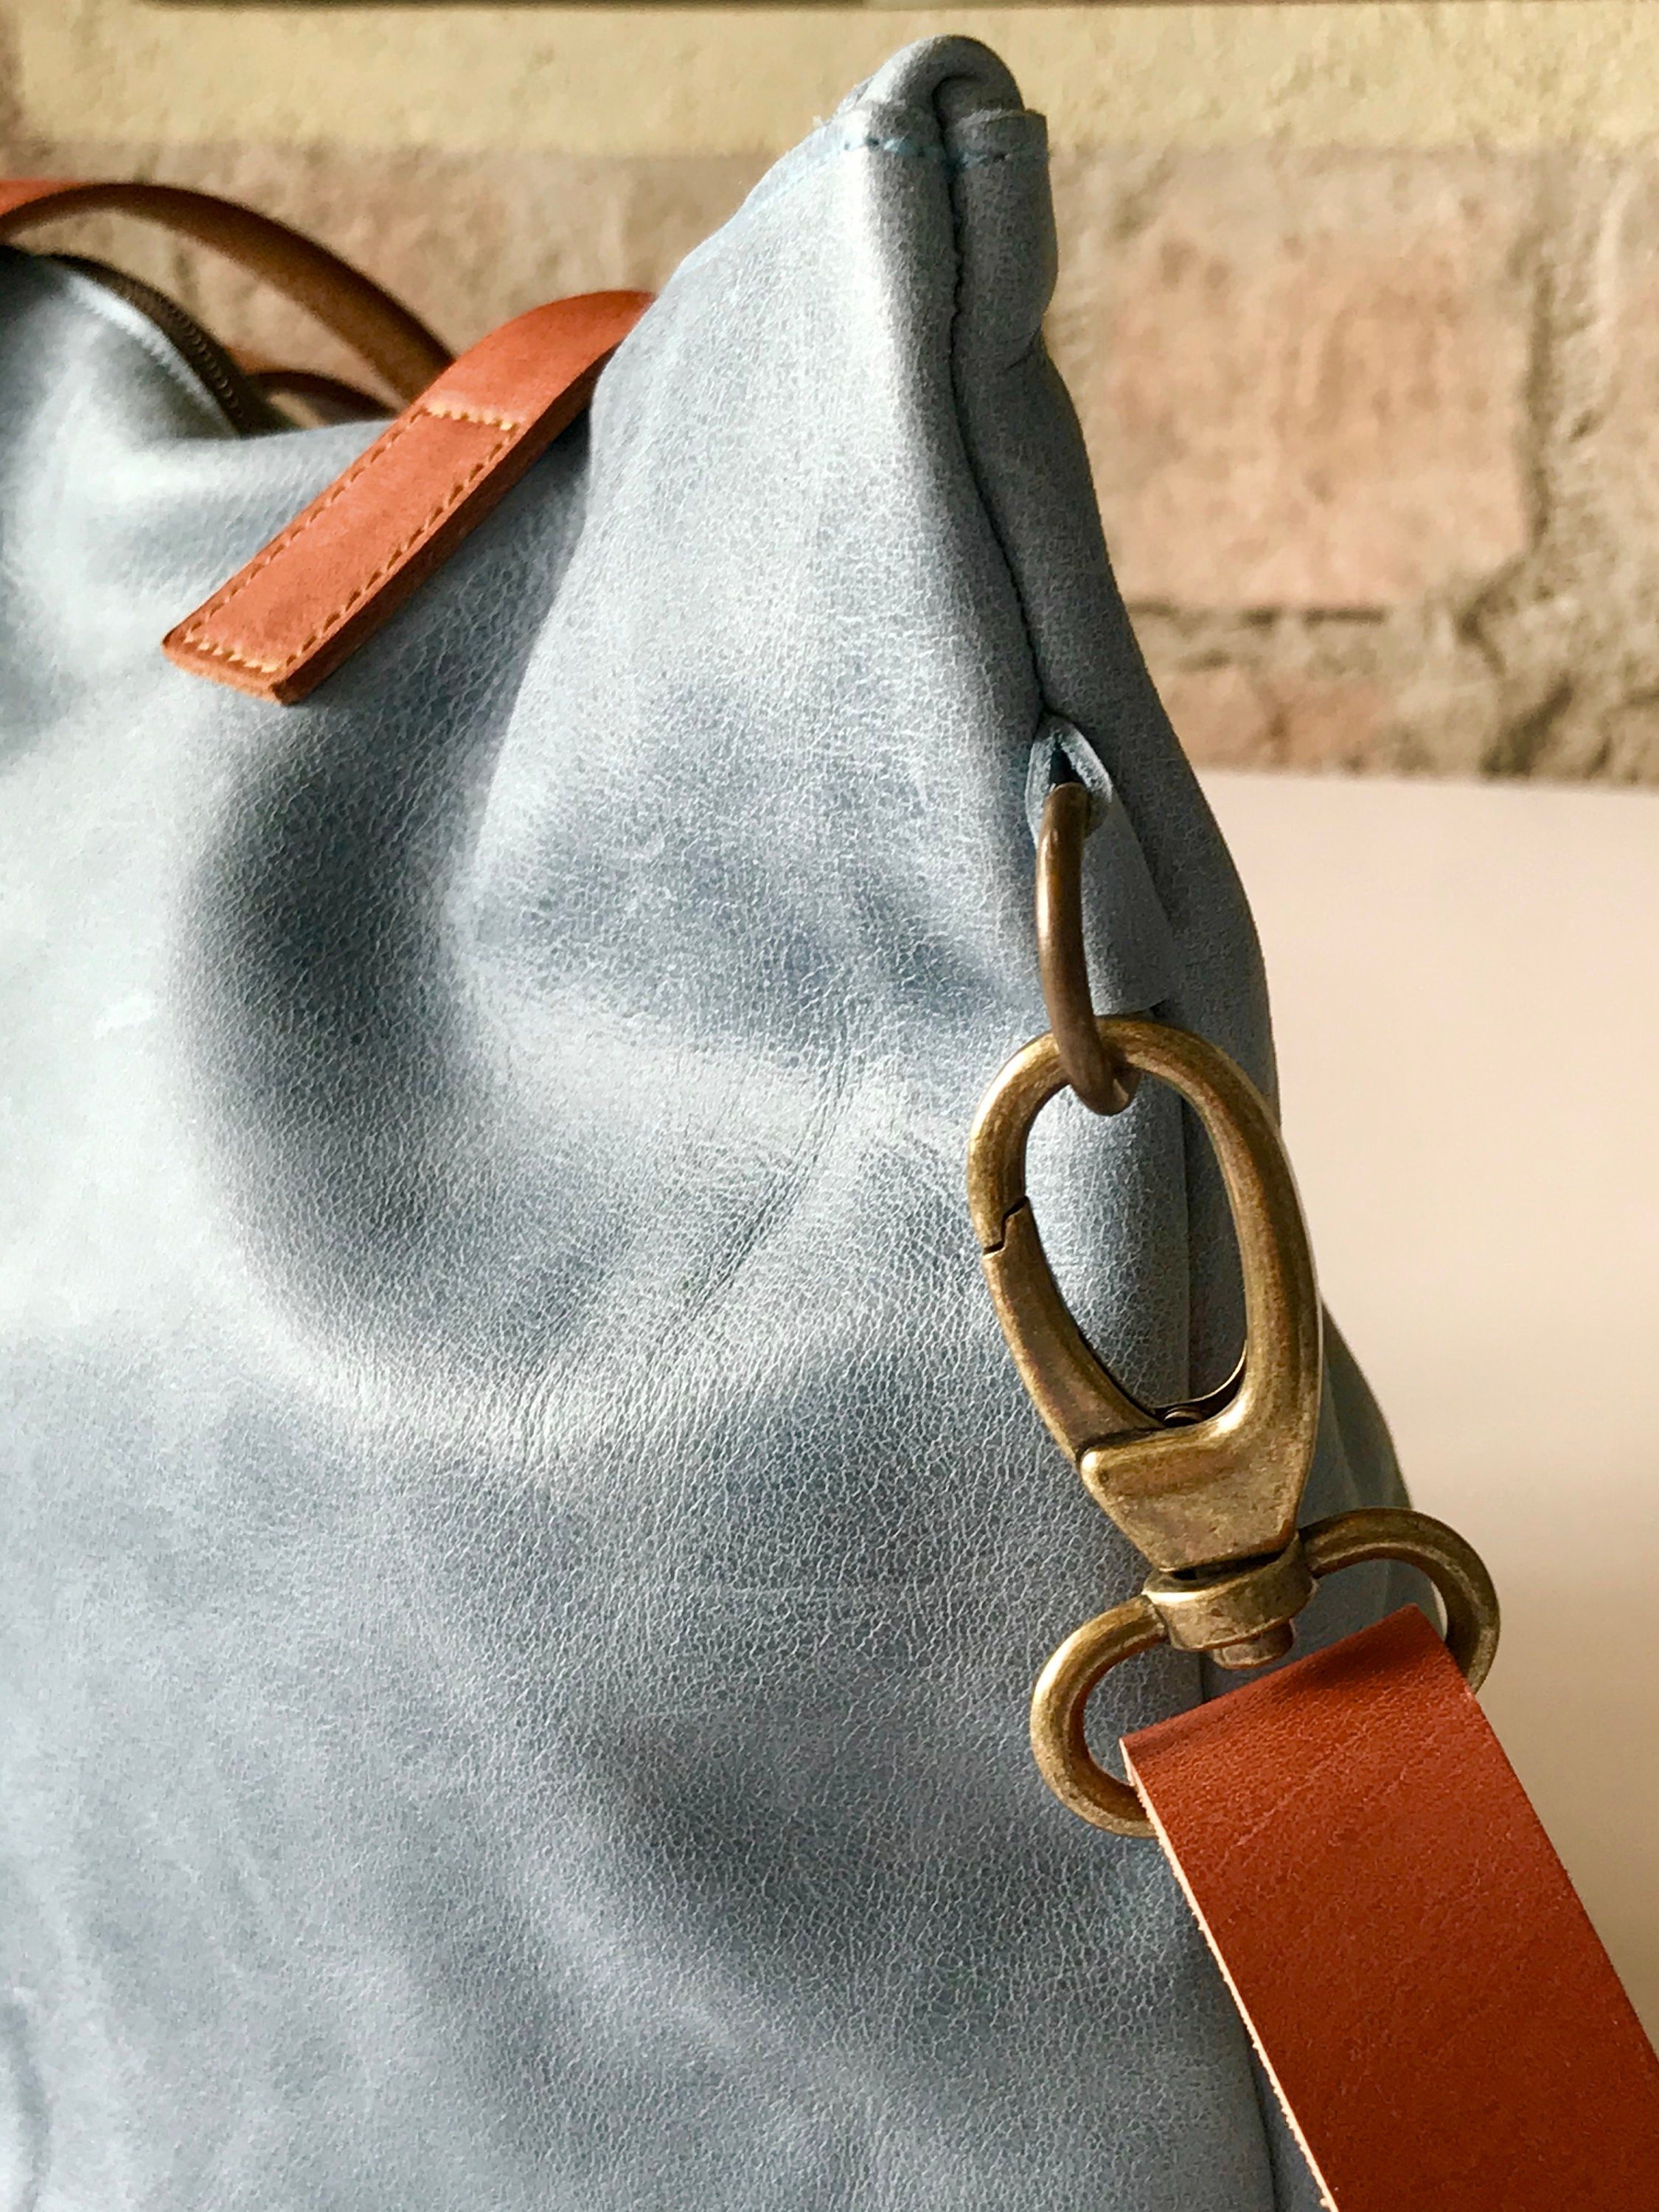 Wooden Handles Leather Bag – B Pozzitive Bags - Upcycled Leather